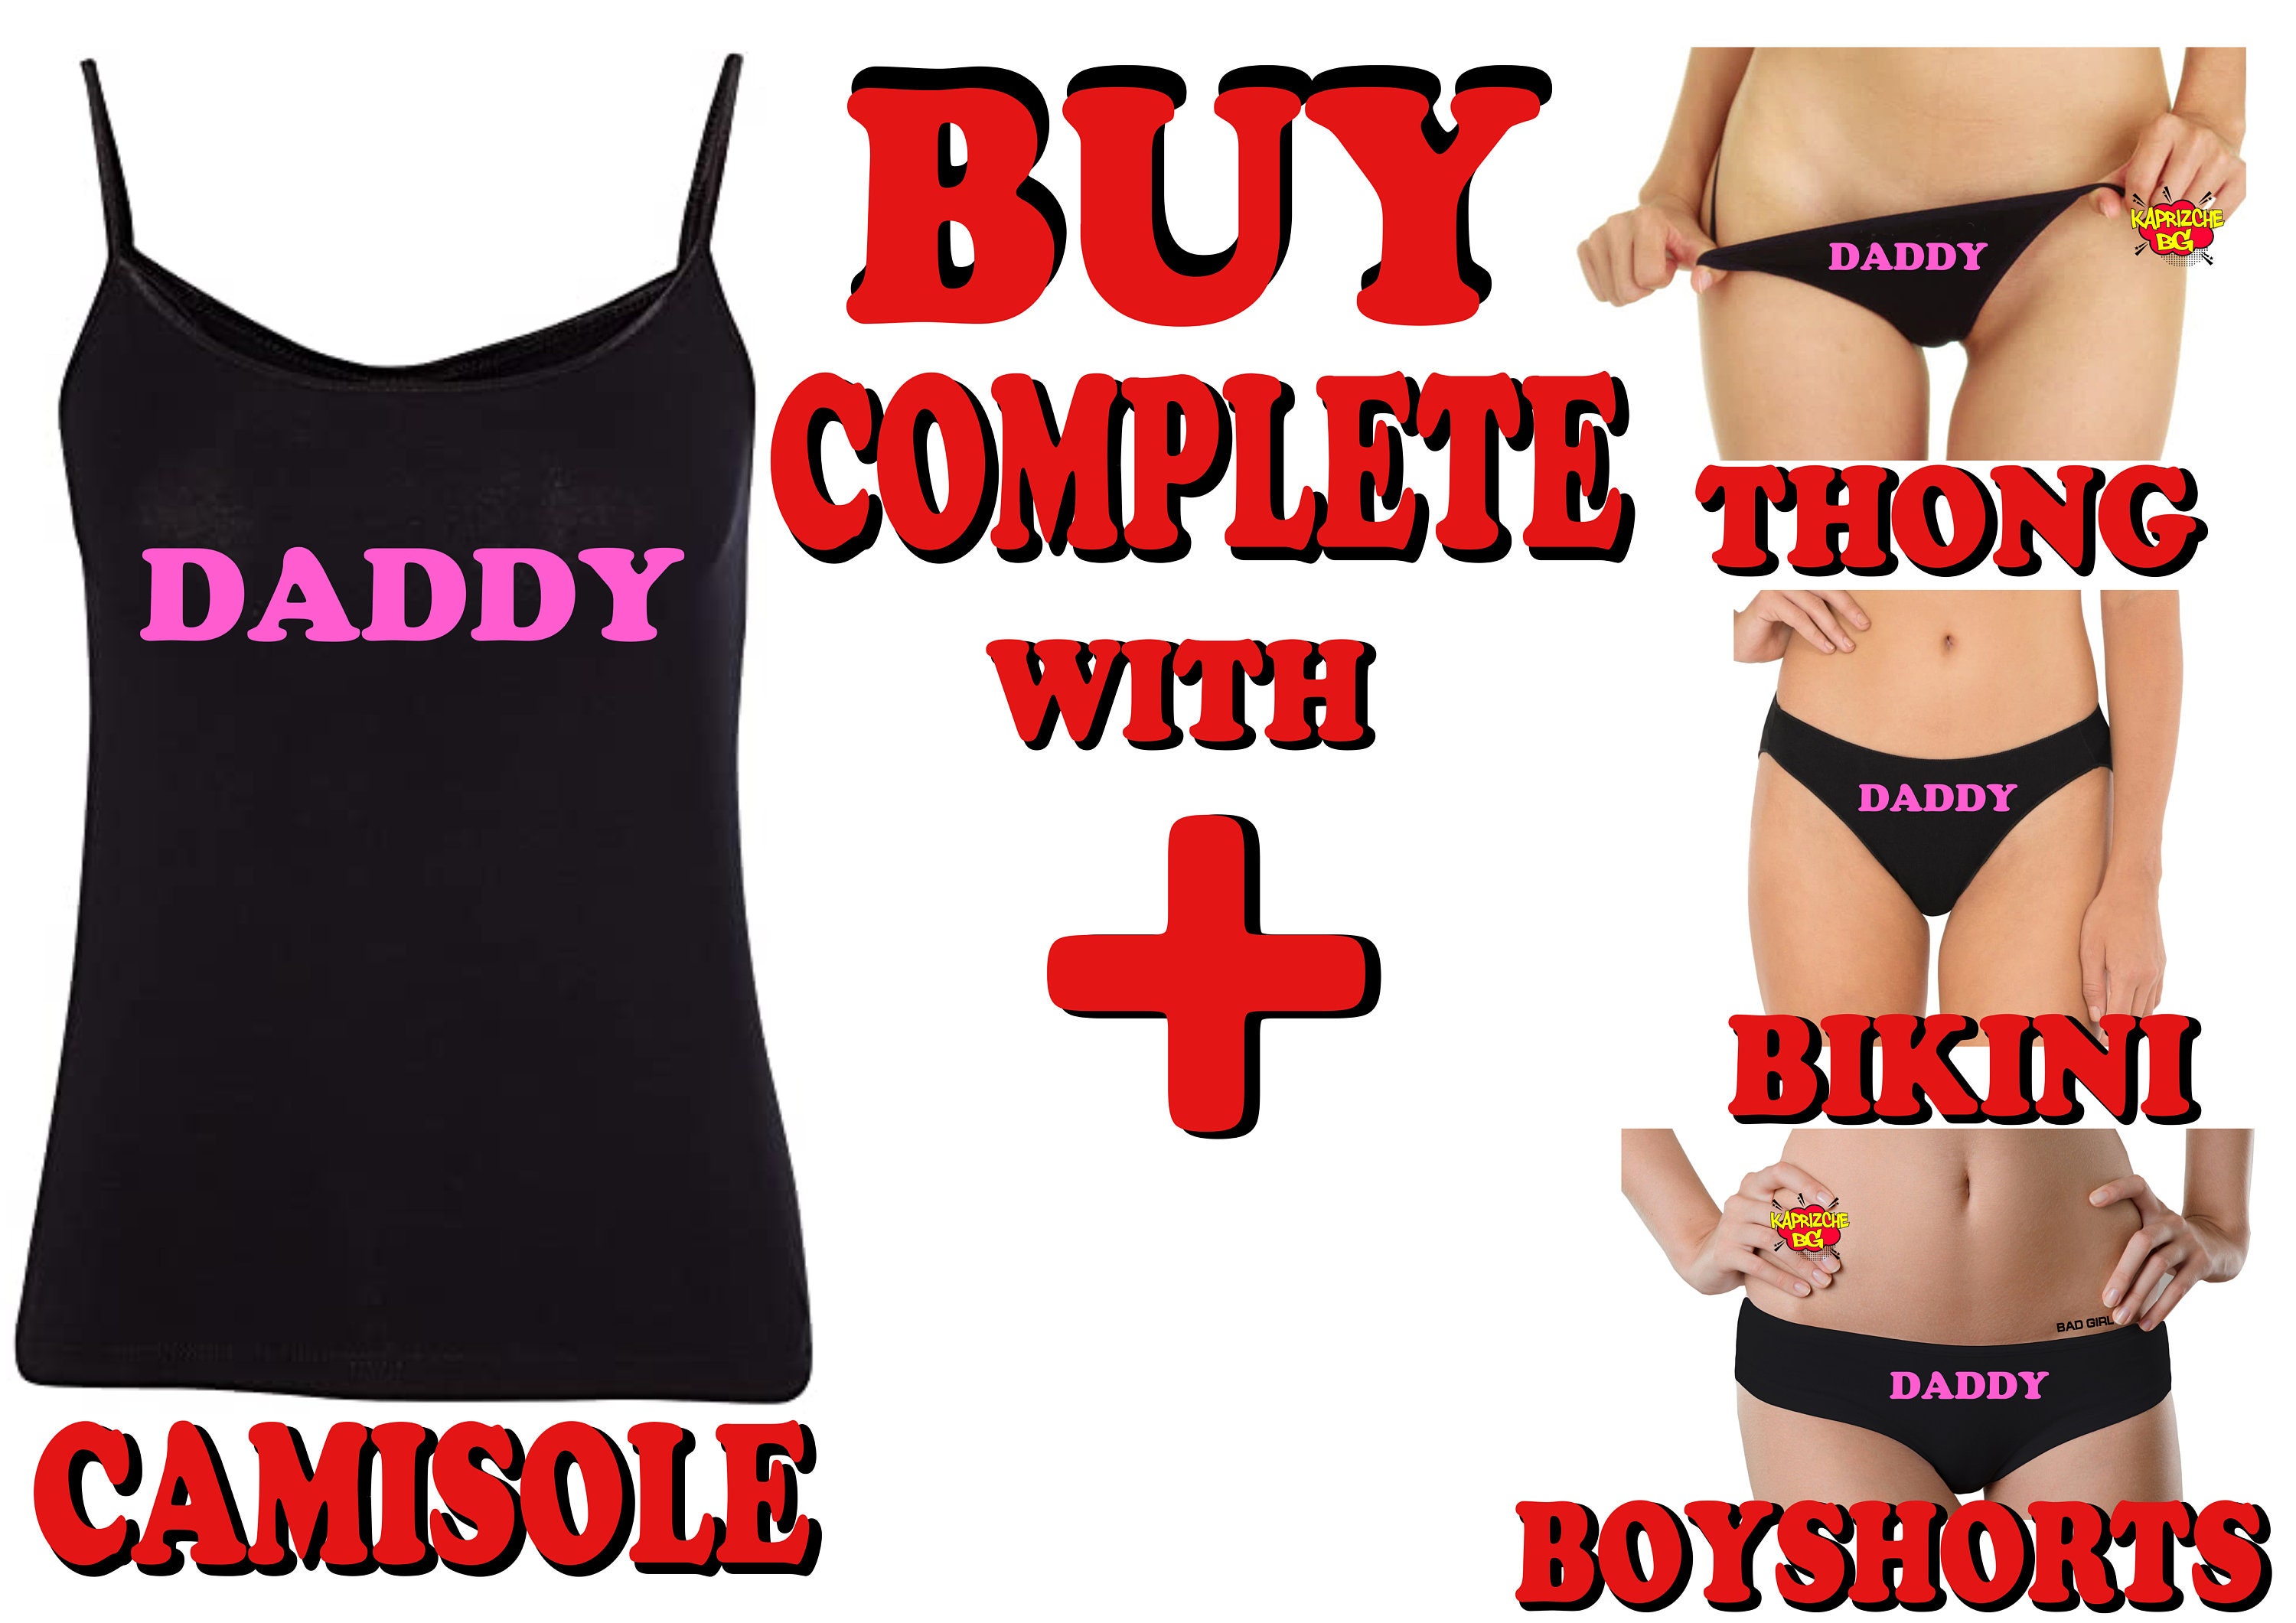 Yes Daddy Camisolecami Tank Top Hotwife Clothingcotton image image